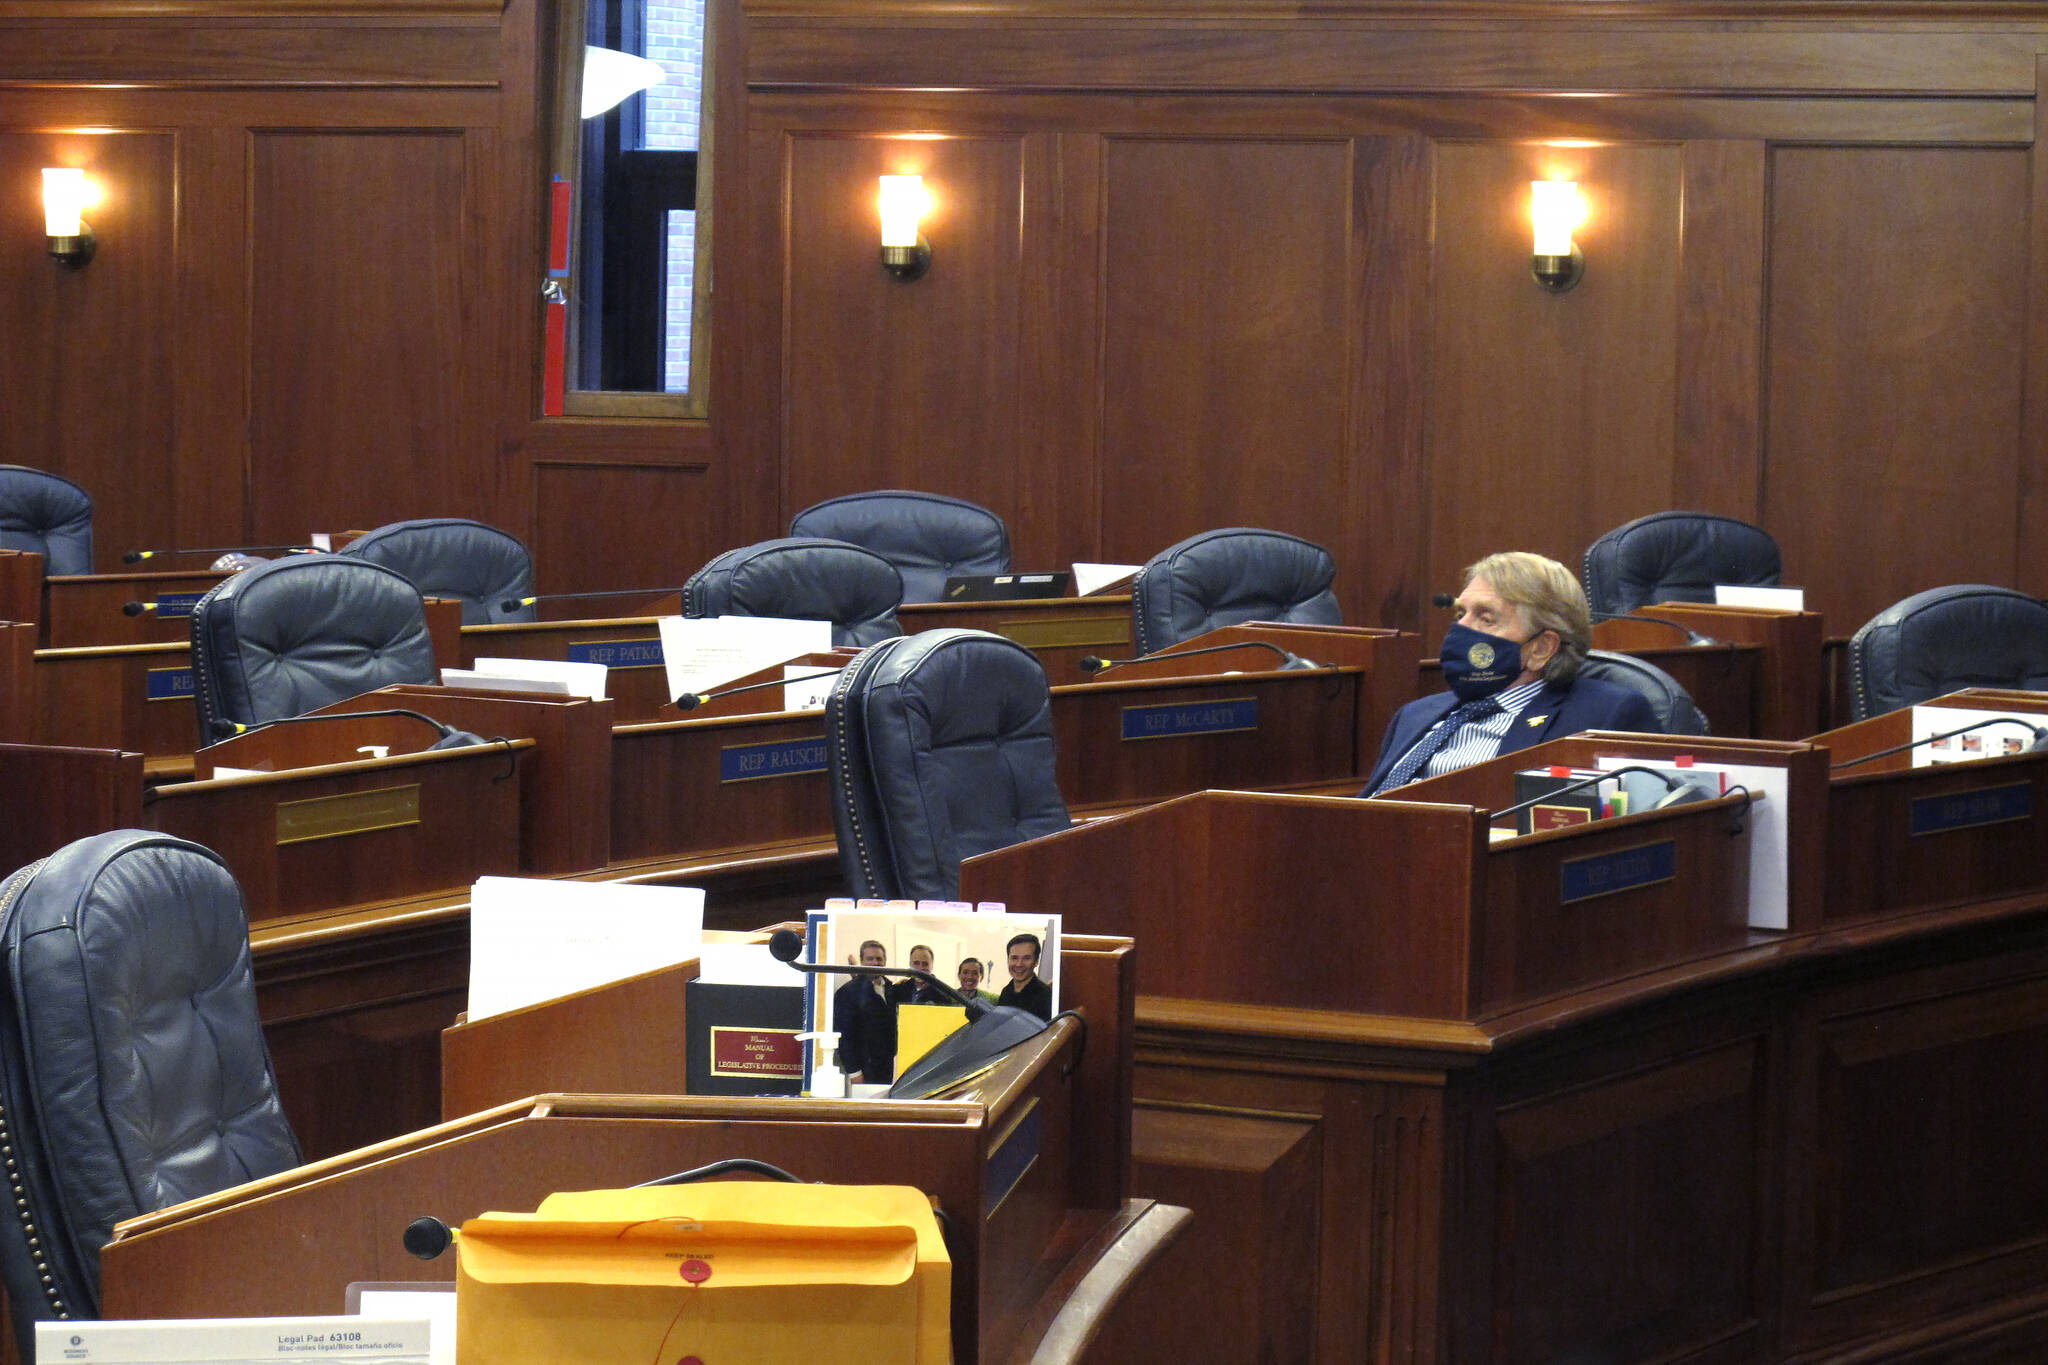 Alaska state Rep. Laddie Shaw, an Anchorage Republican, waits for the start of a so-called technical session on the House floor, Wednesday, Oct. 20, 2021, in Juneau, Alaska. The fourth special legislative session of the year began Oct. 4, in Juneau, but there has been little action at the Capitol and little progress toward resolving Alaska’s fiscal issues. (AP Photo / Becky Bohrer)